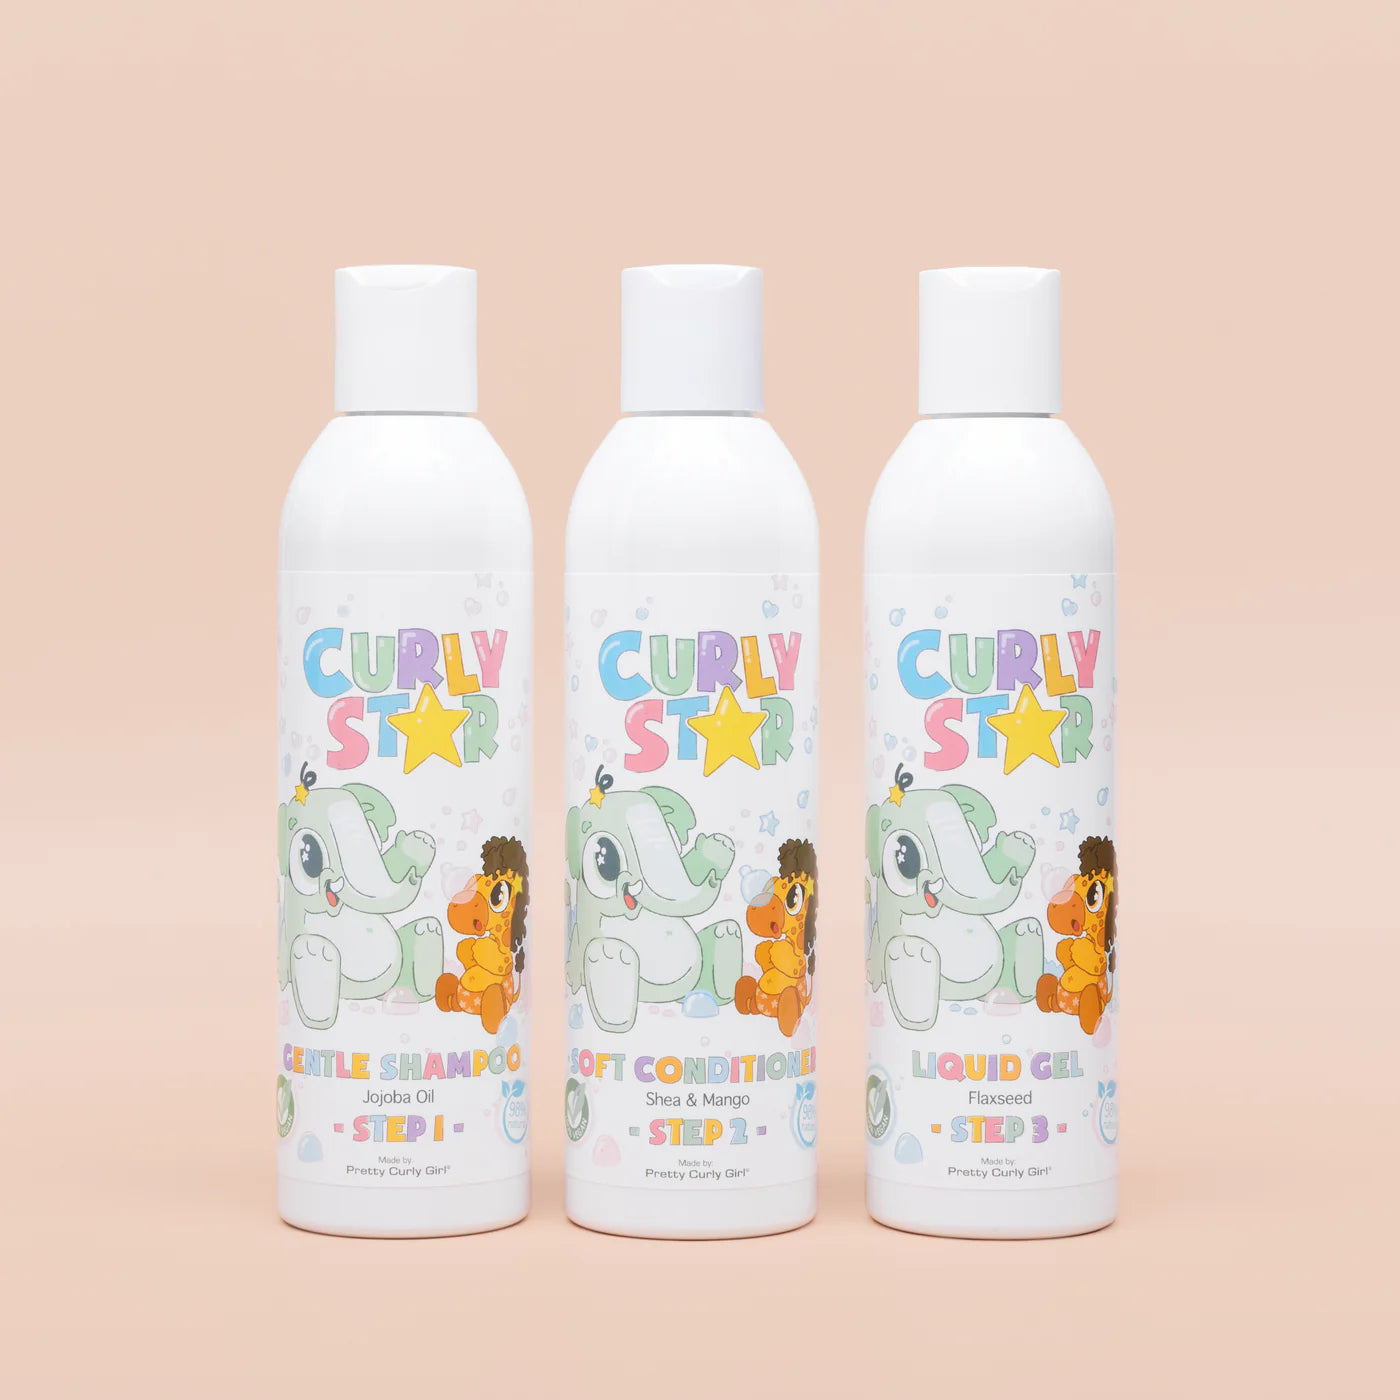 Curly Star - Bundle set - 3 products